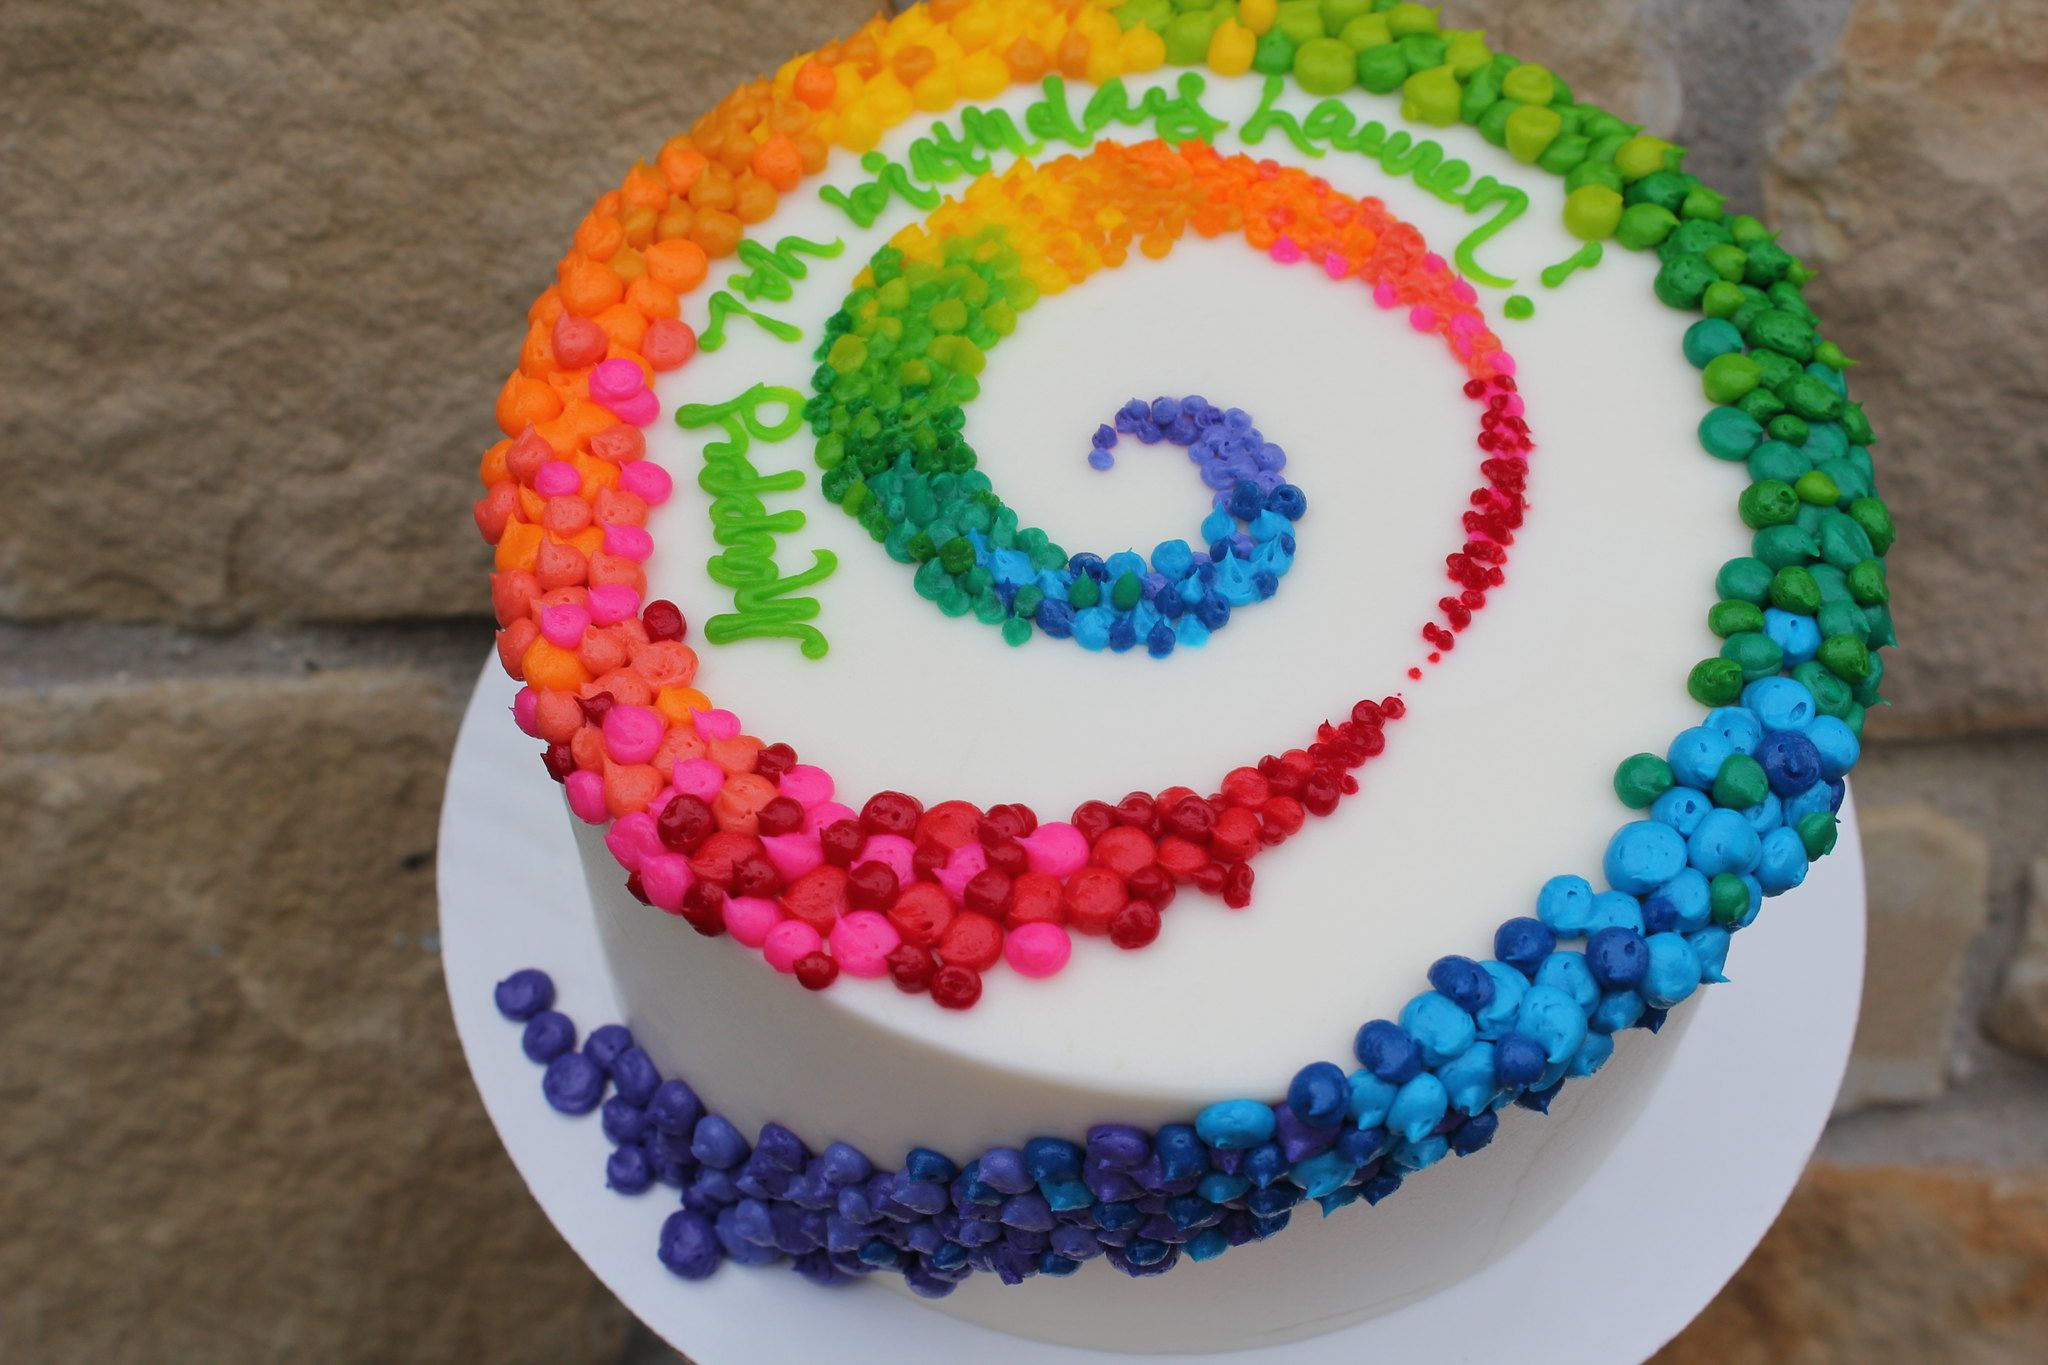 Colorful Patterned Swirl on White Cake: Birthday Cakes, Colorful Cakes